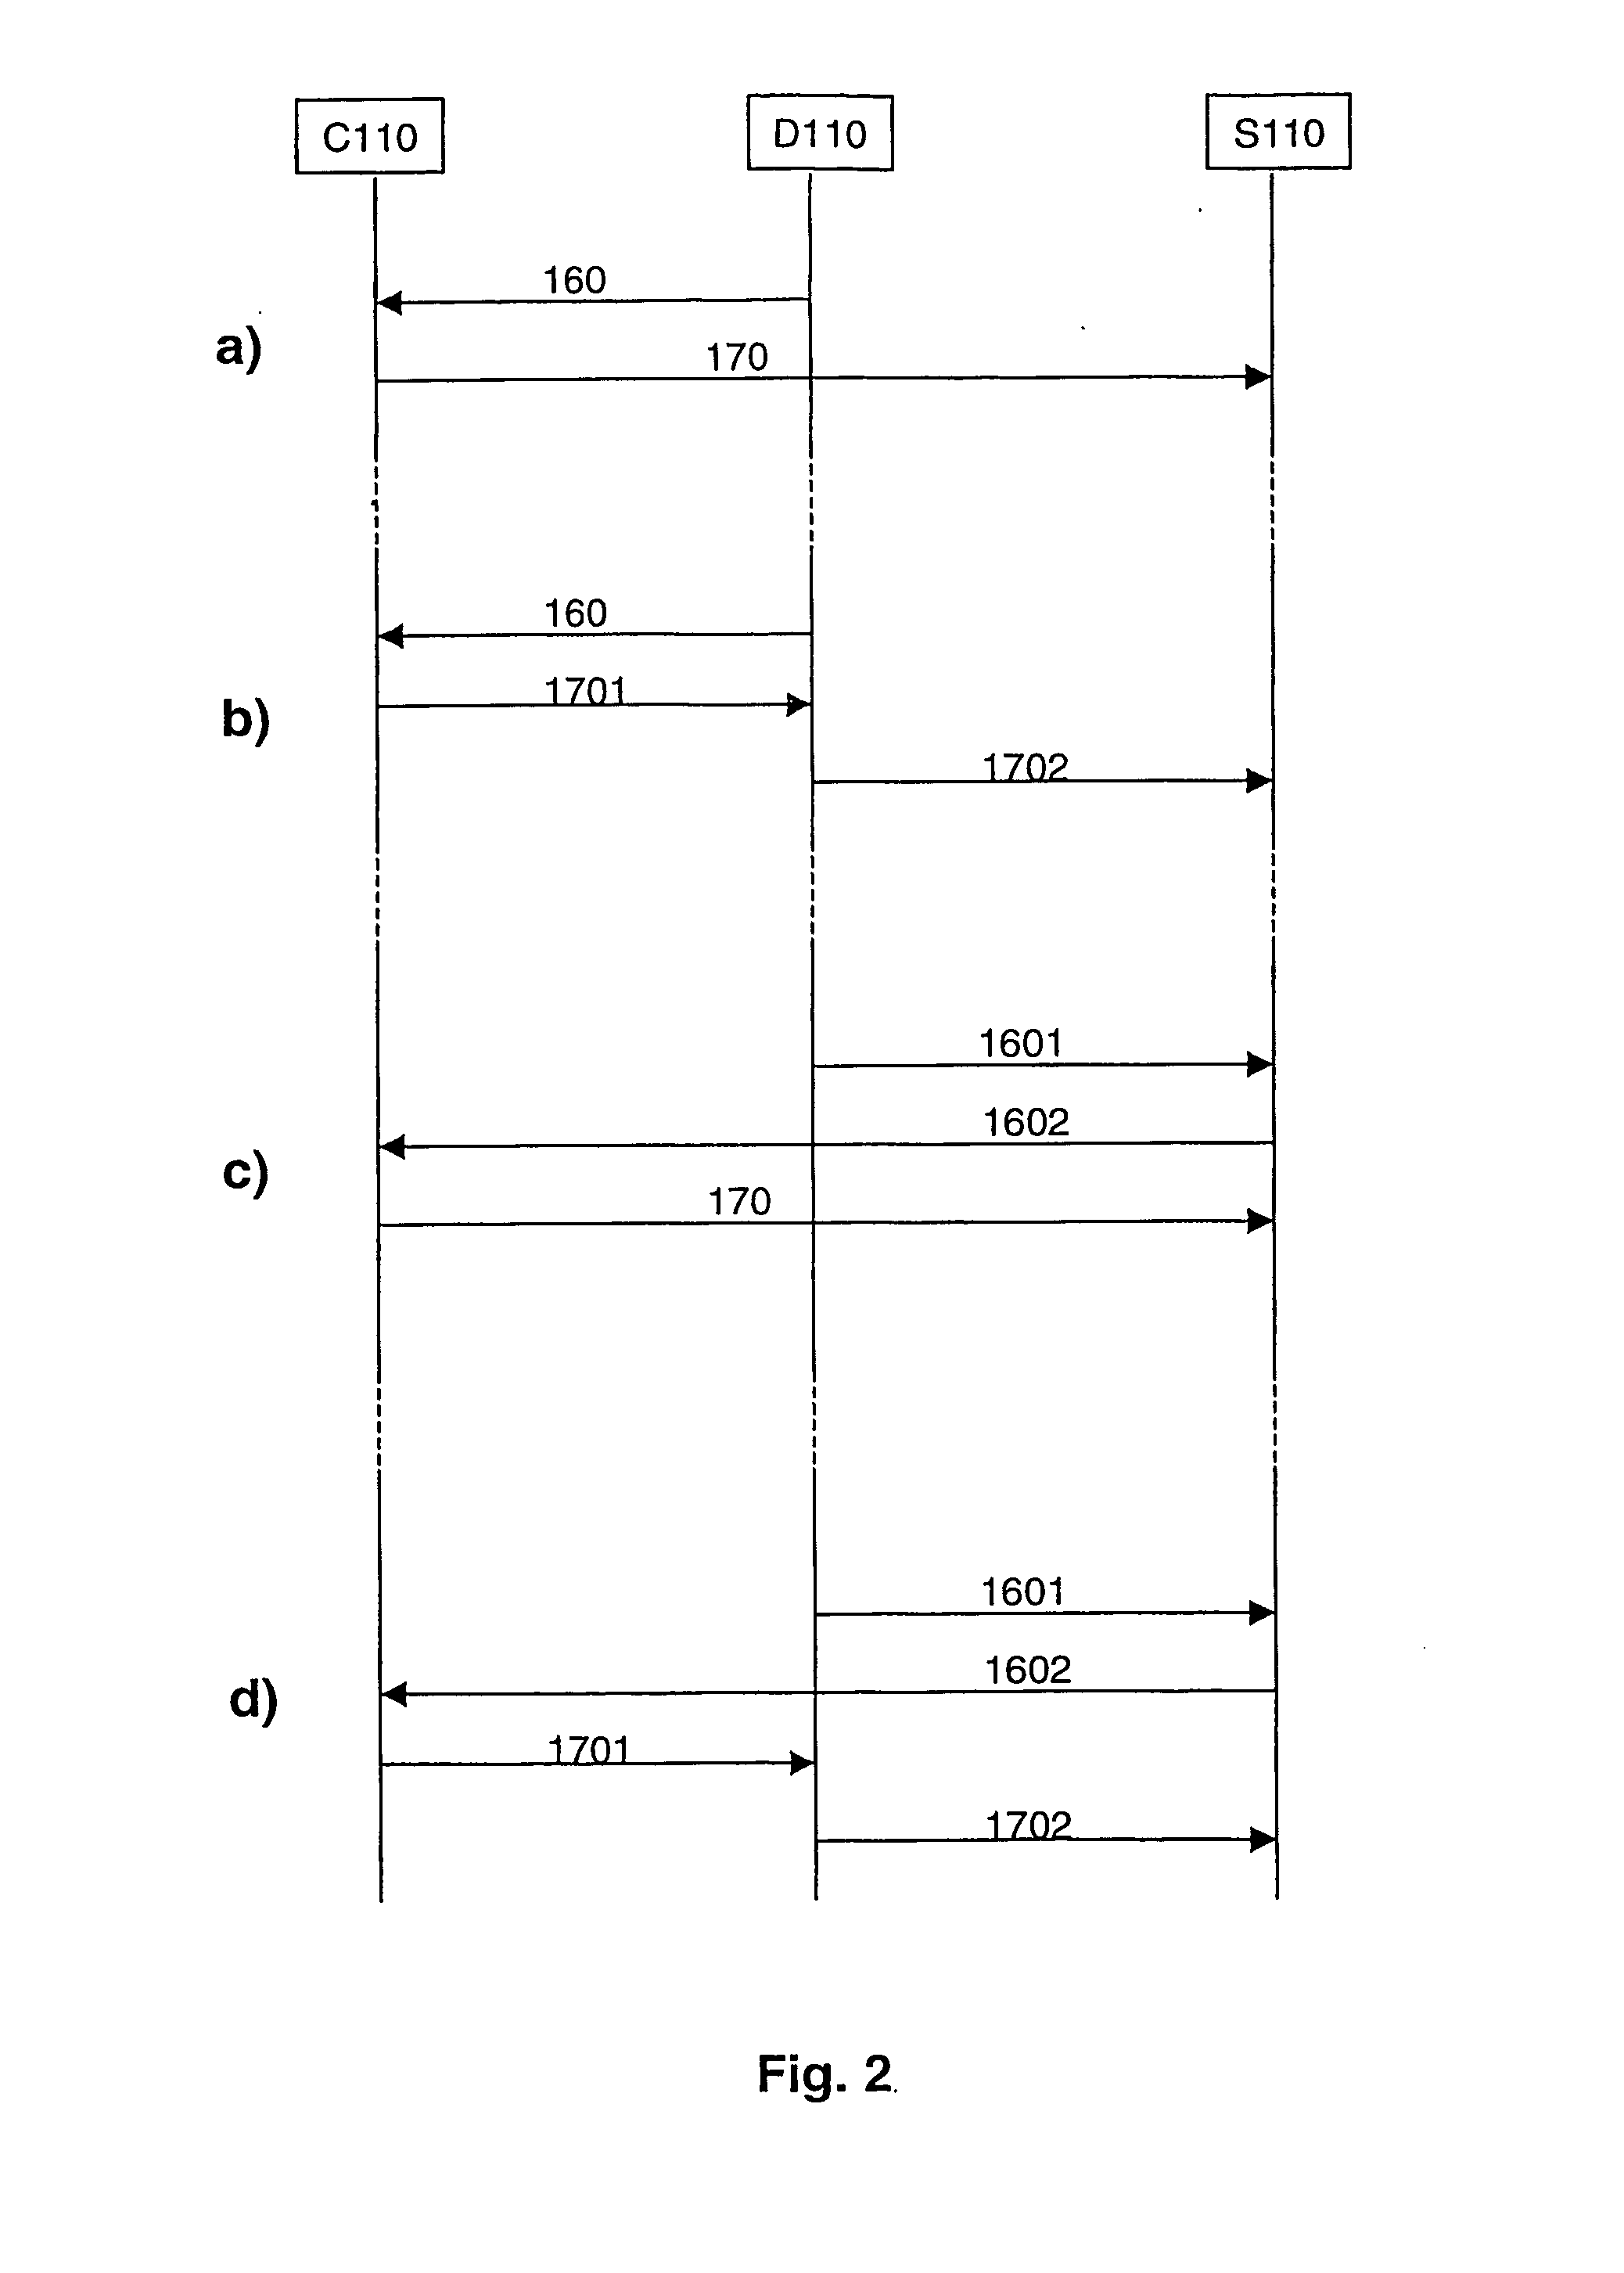 Method and Device for Delivery or Obtaining of a Good